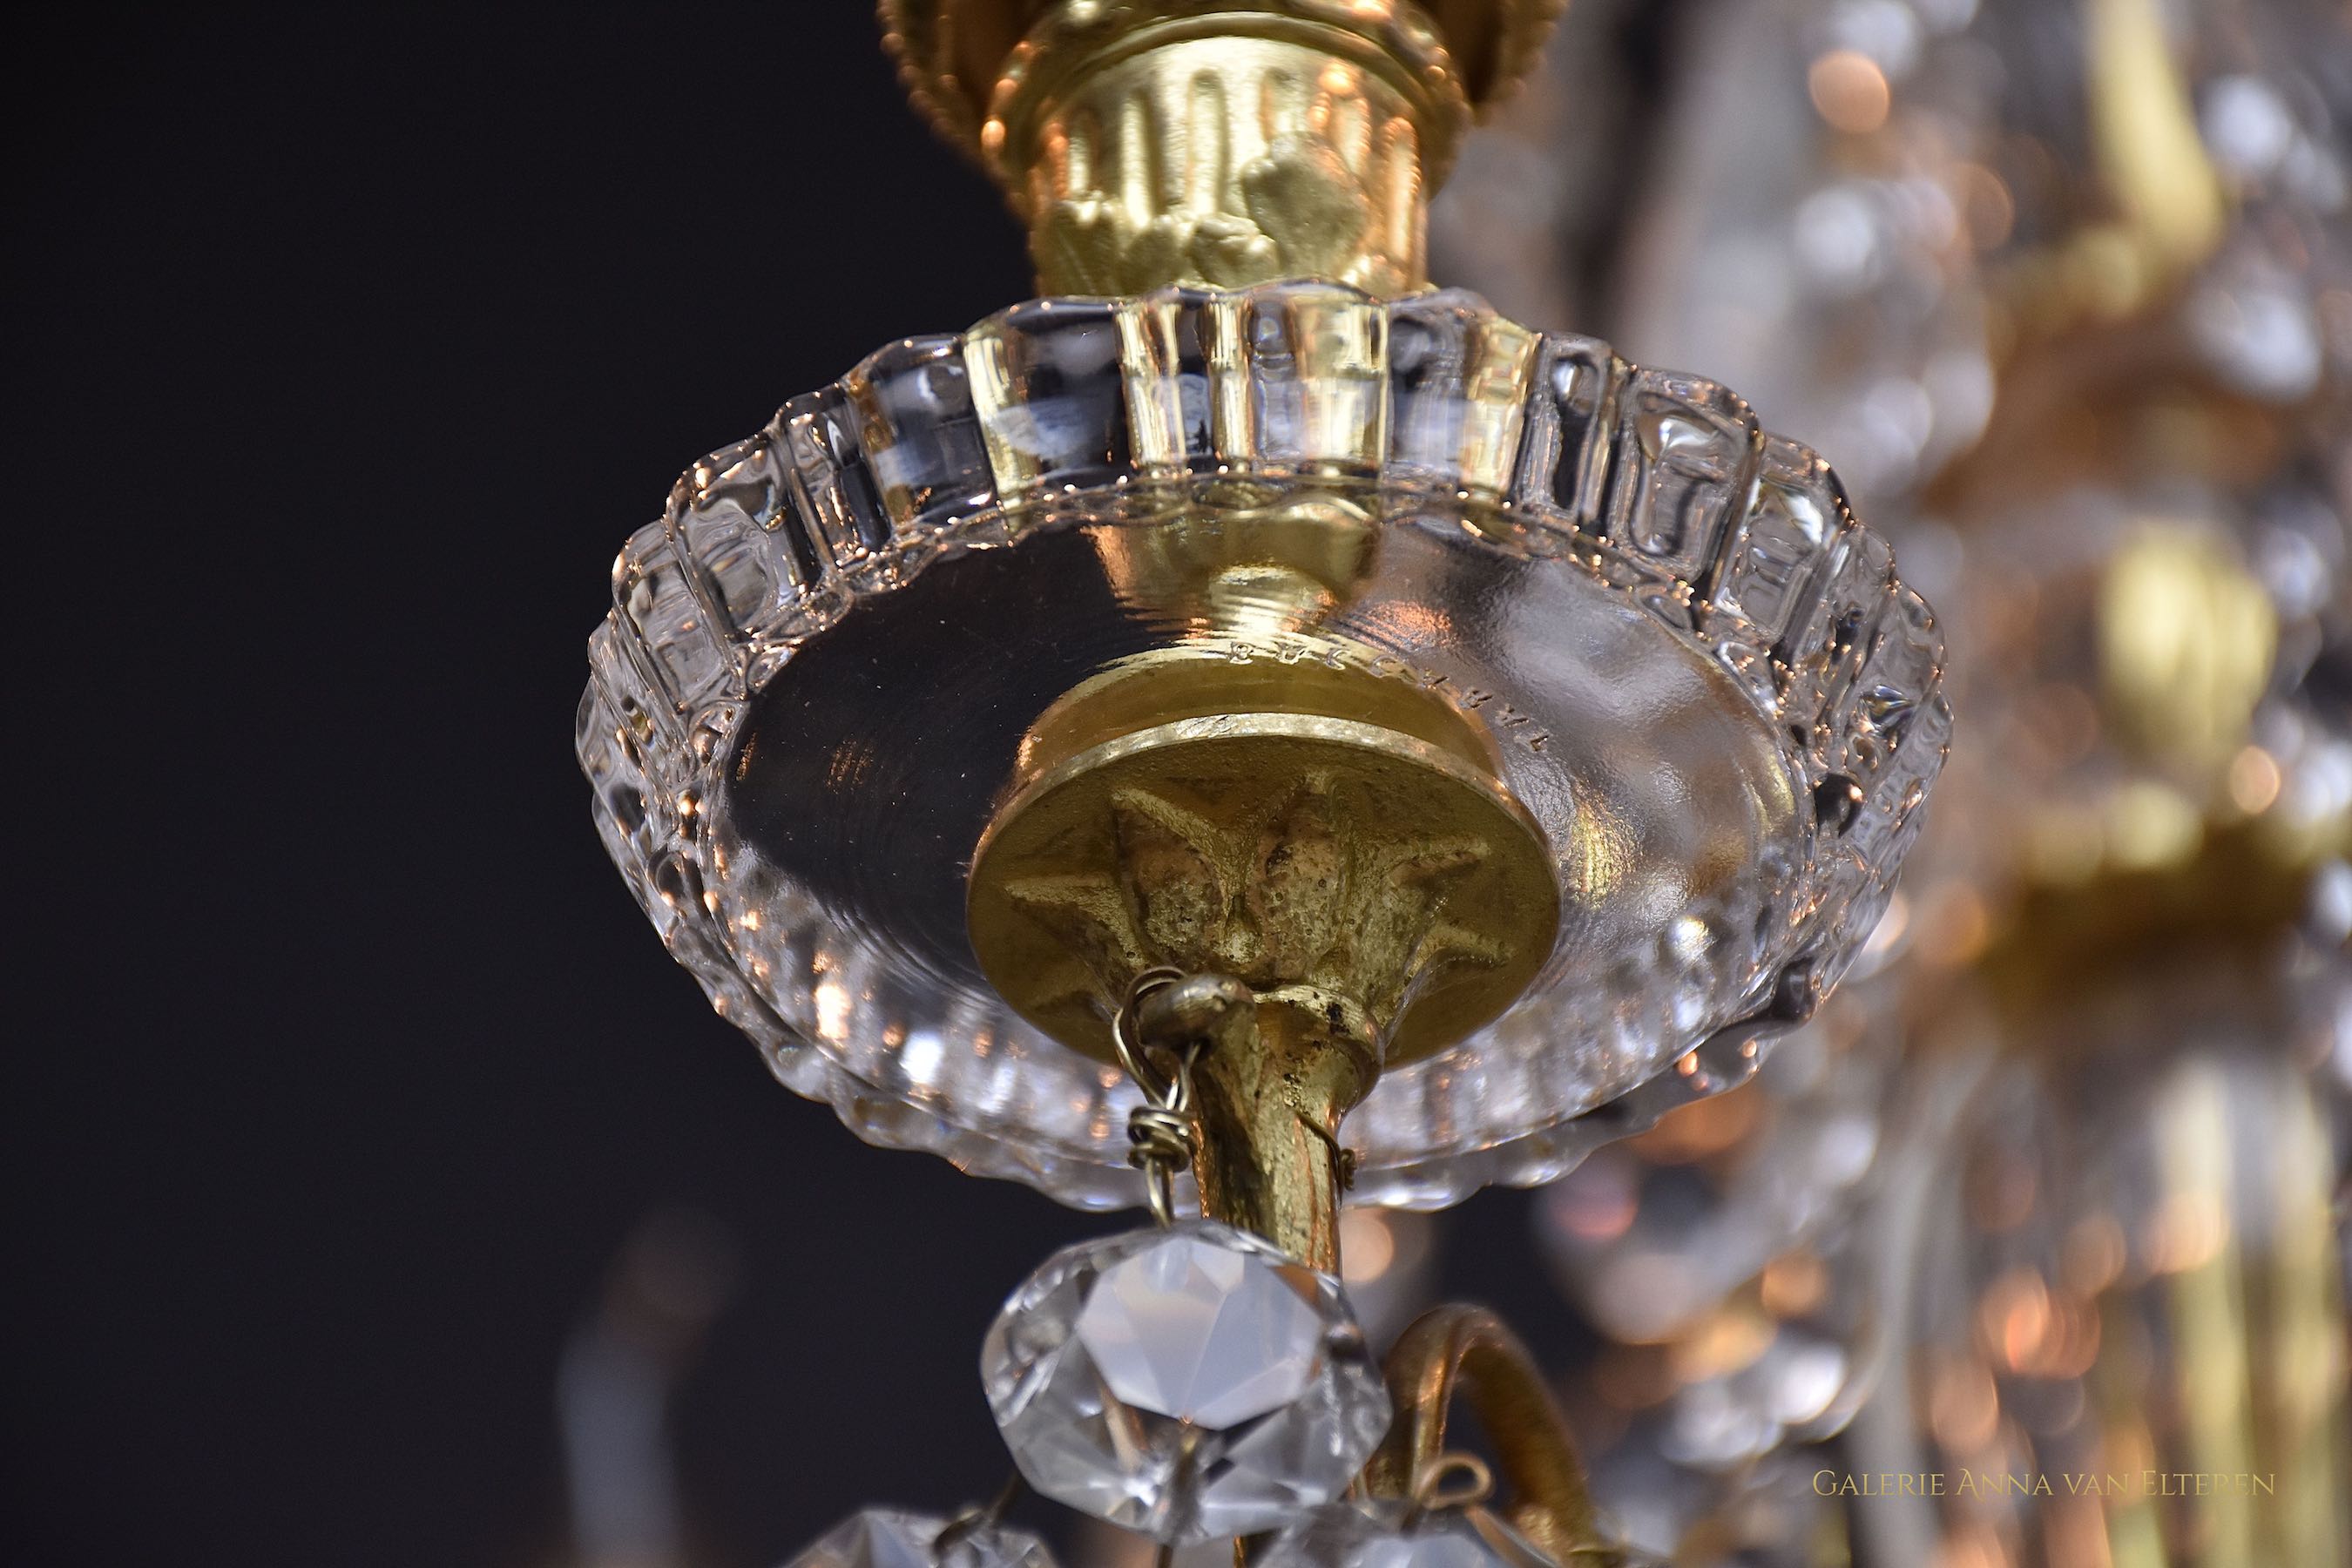 19th c. Baccarat chandelier in style of Louis XVI